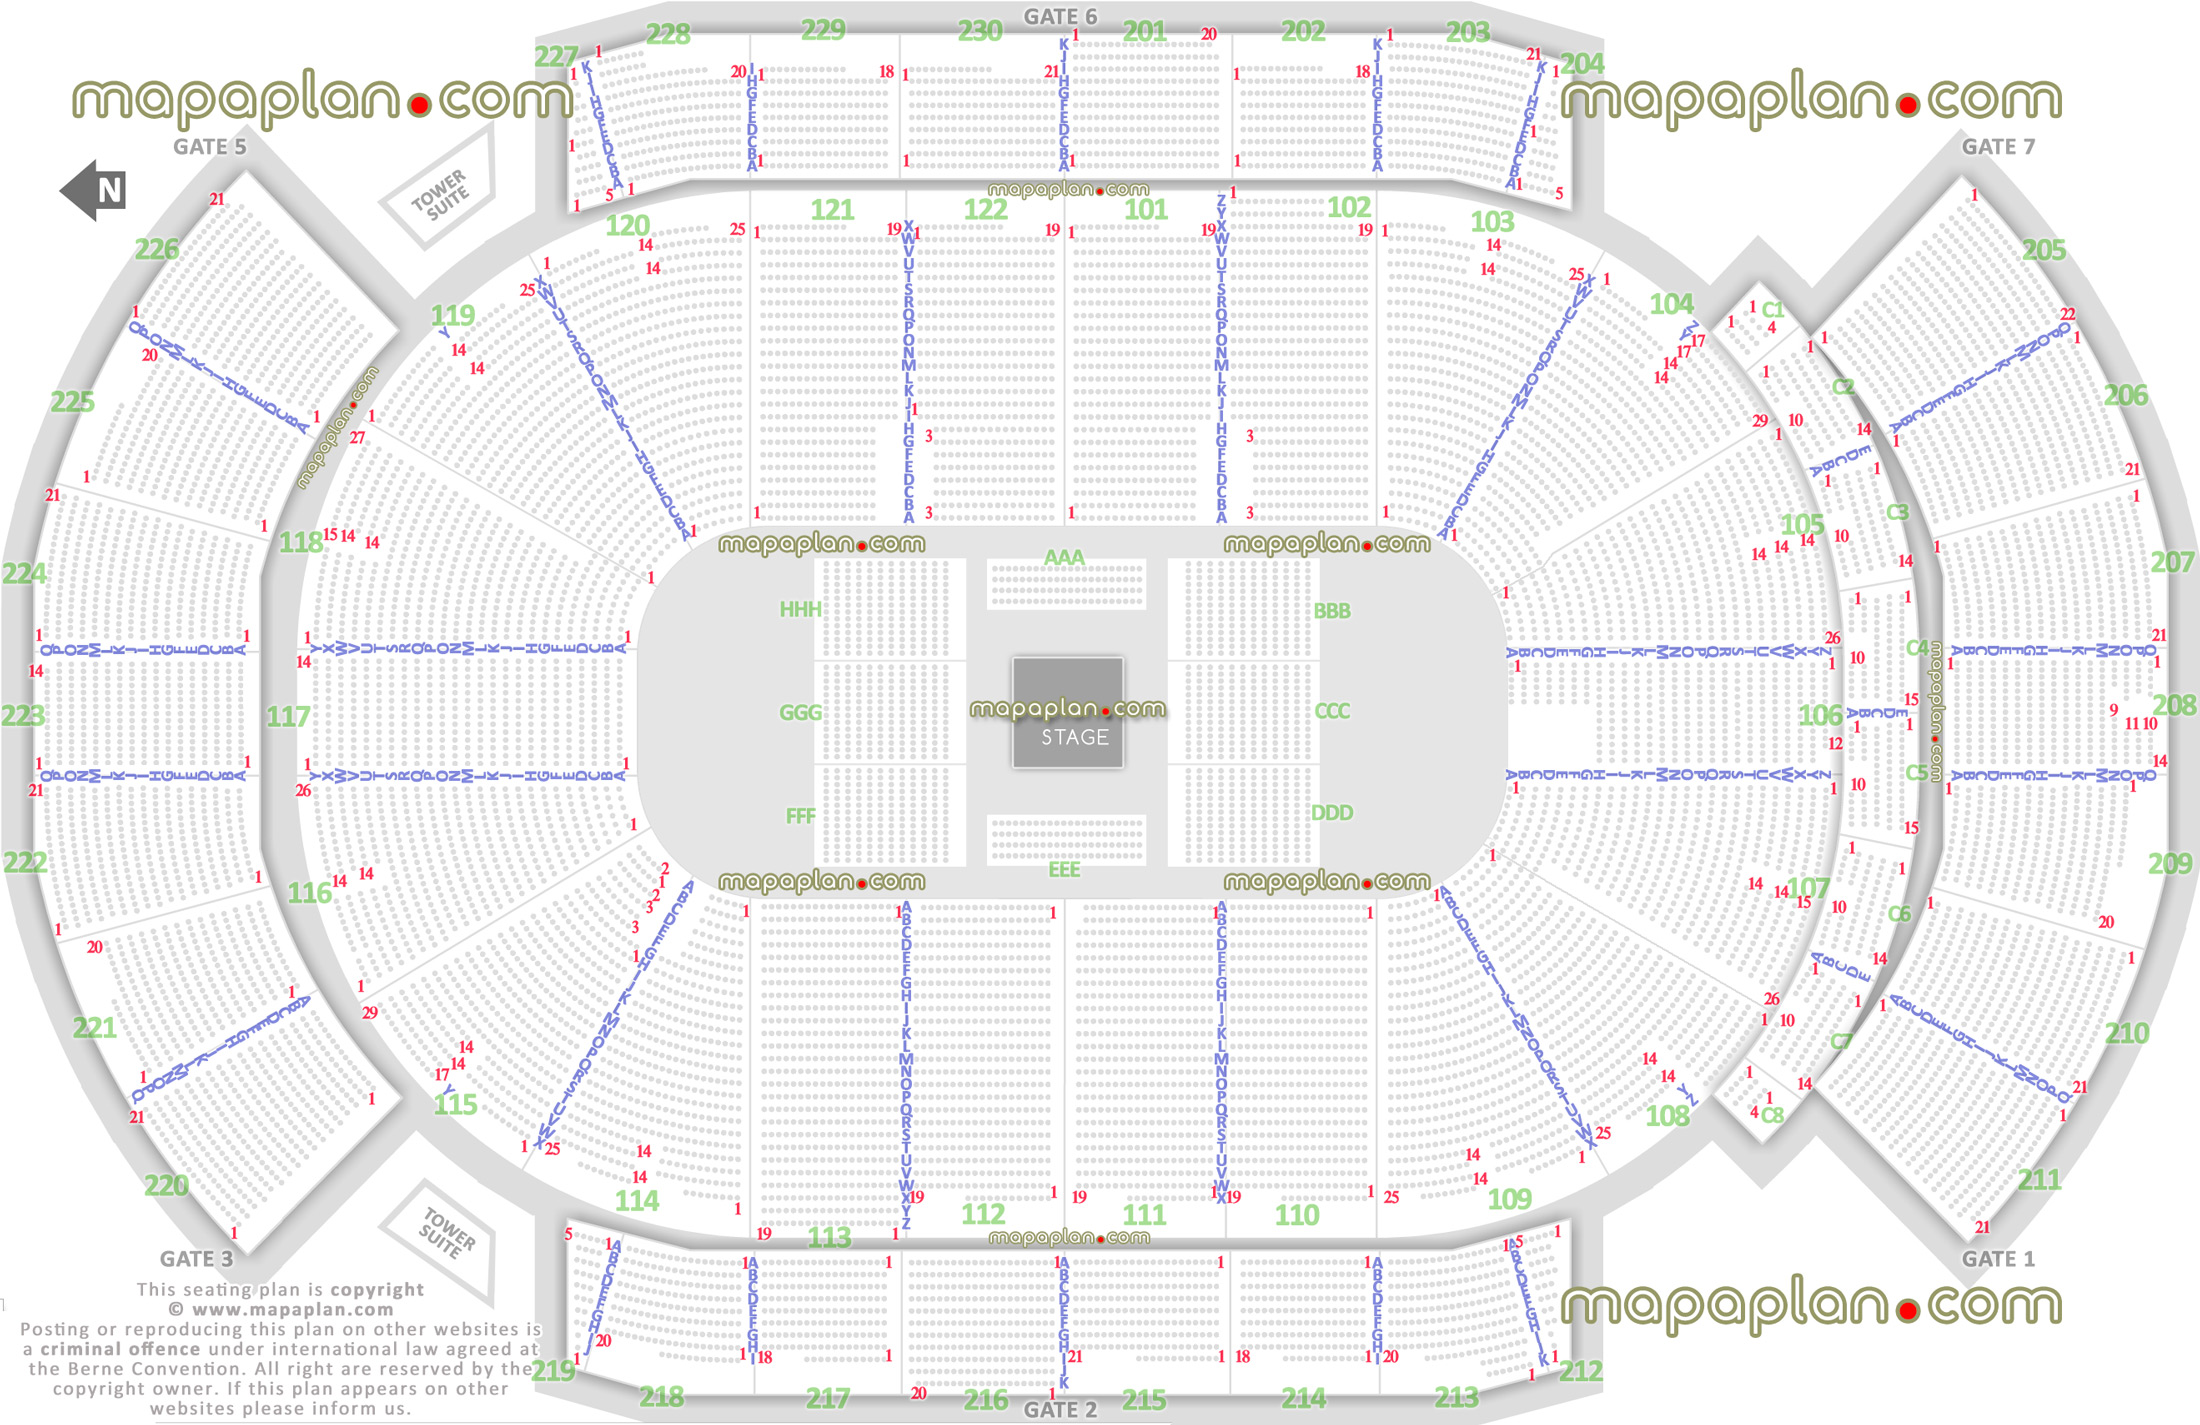 concert stage round printable virtual layout 360 degree arrangement interactive diagram seats row lower club upper level sections best seat numbers selection wheelchair disabled handicap accessible seats plan premium executive loge boxes luxury executive suites Glendale Gila River Arena seating chart